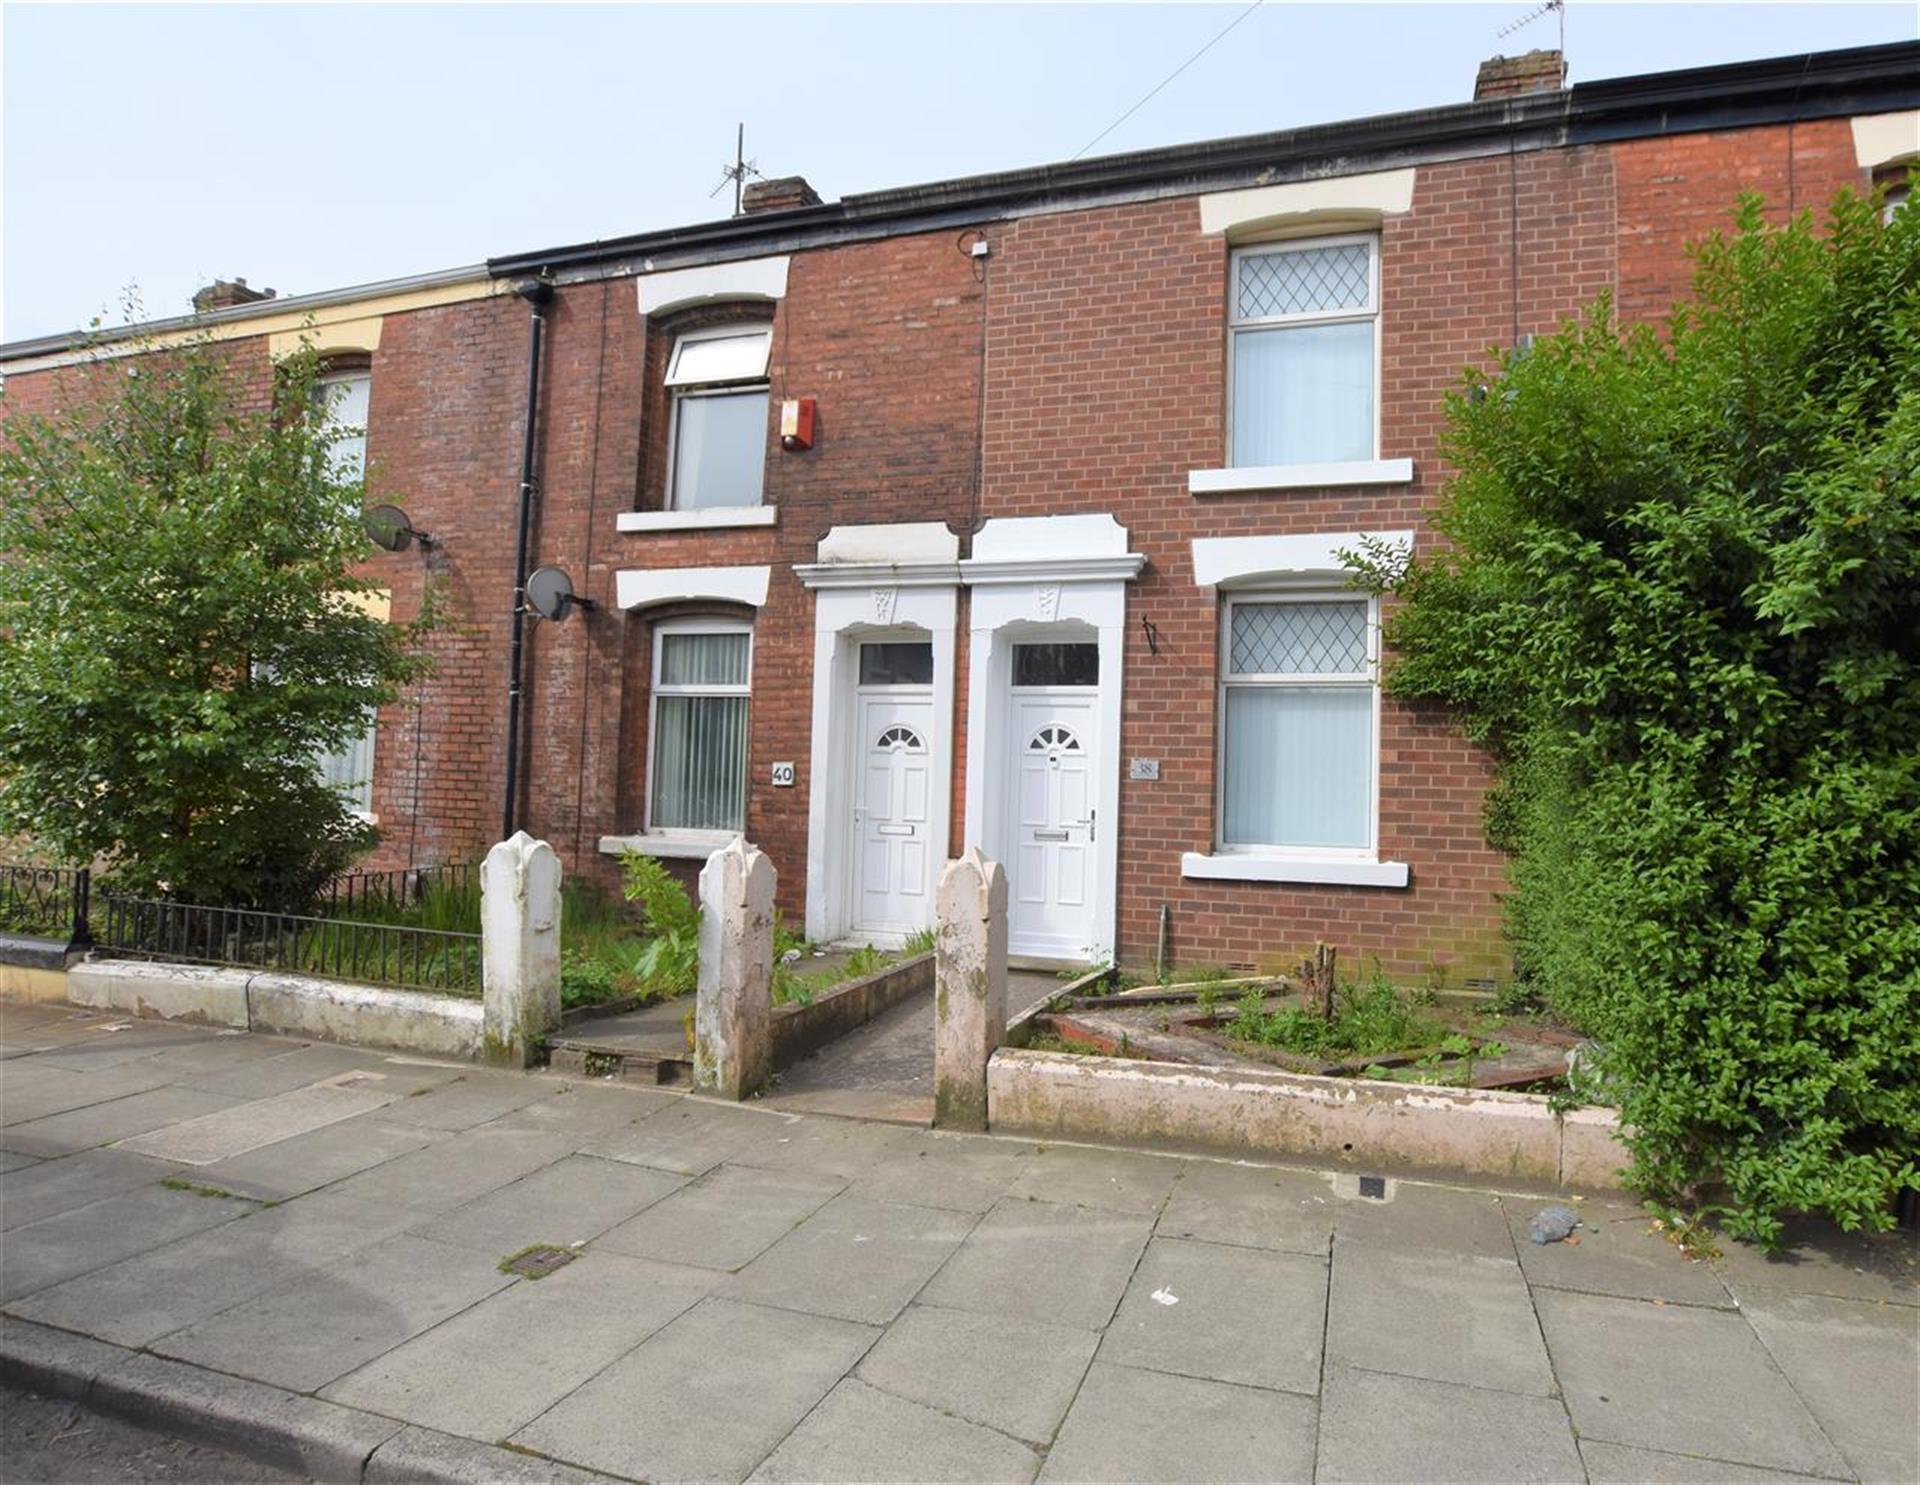 2 Bedroom Terraced House For Sale - Main Picture